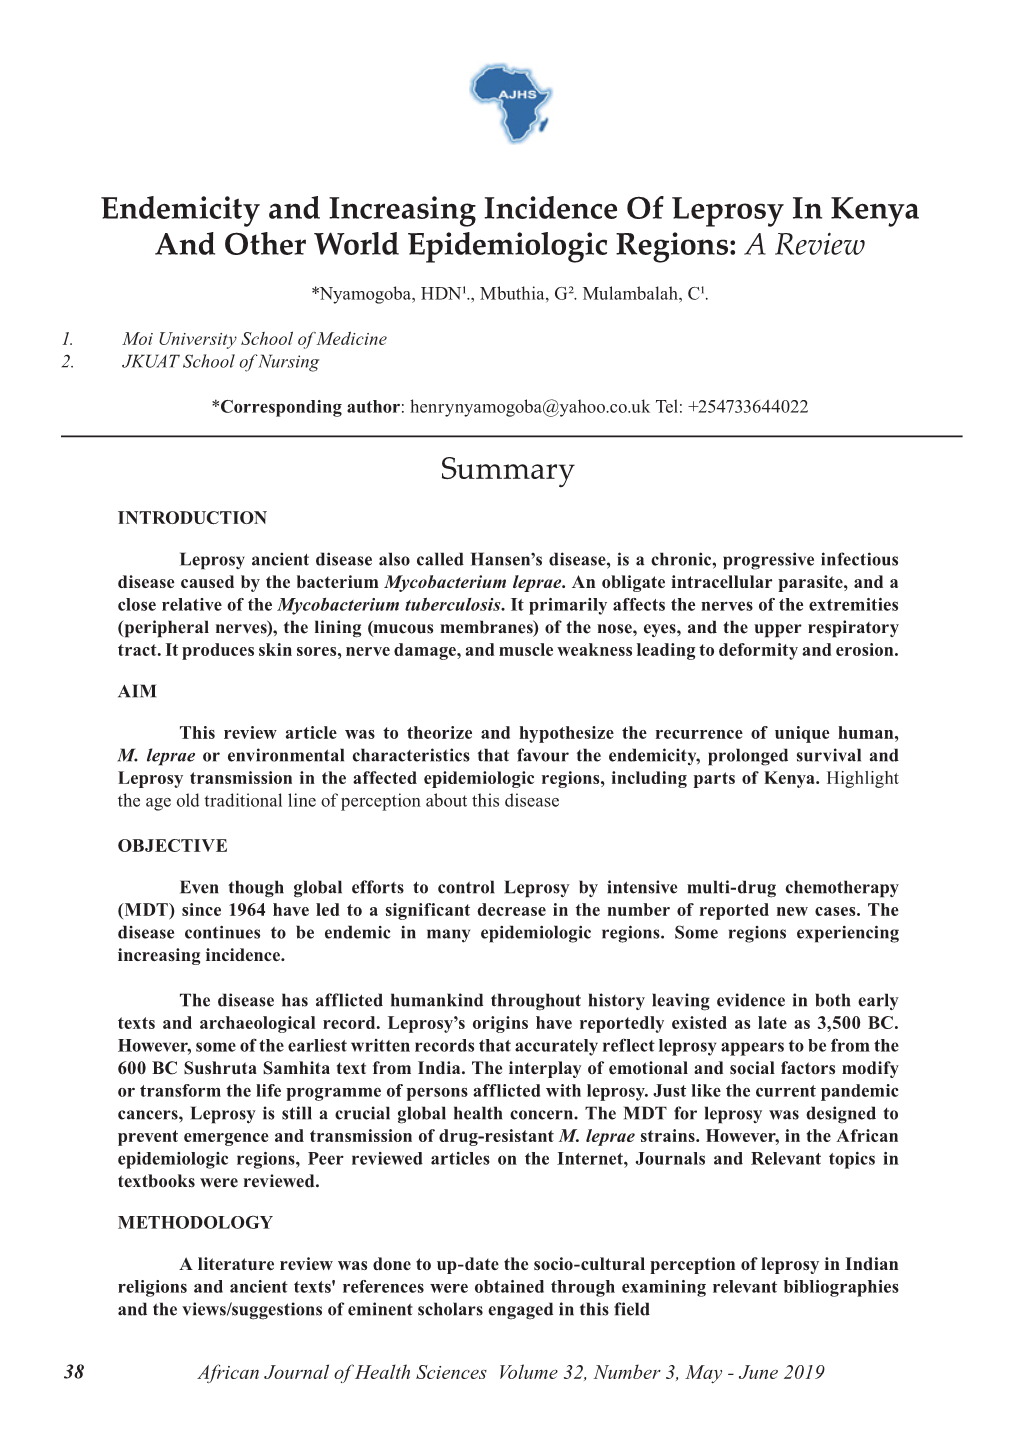 Endemicity and Increasing Incidence of Leprosy in Kenya and Other World Epidemiologic Regions: a Review